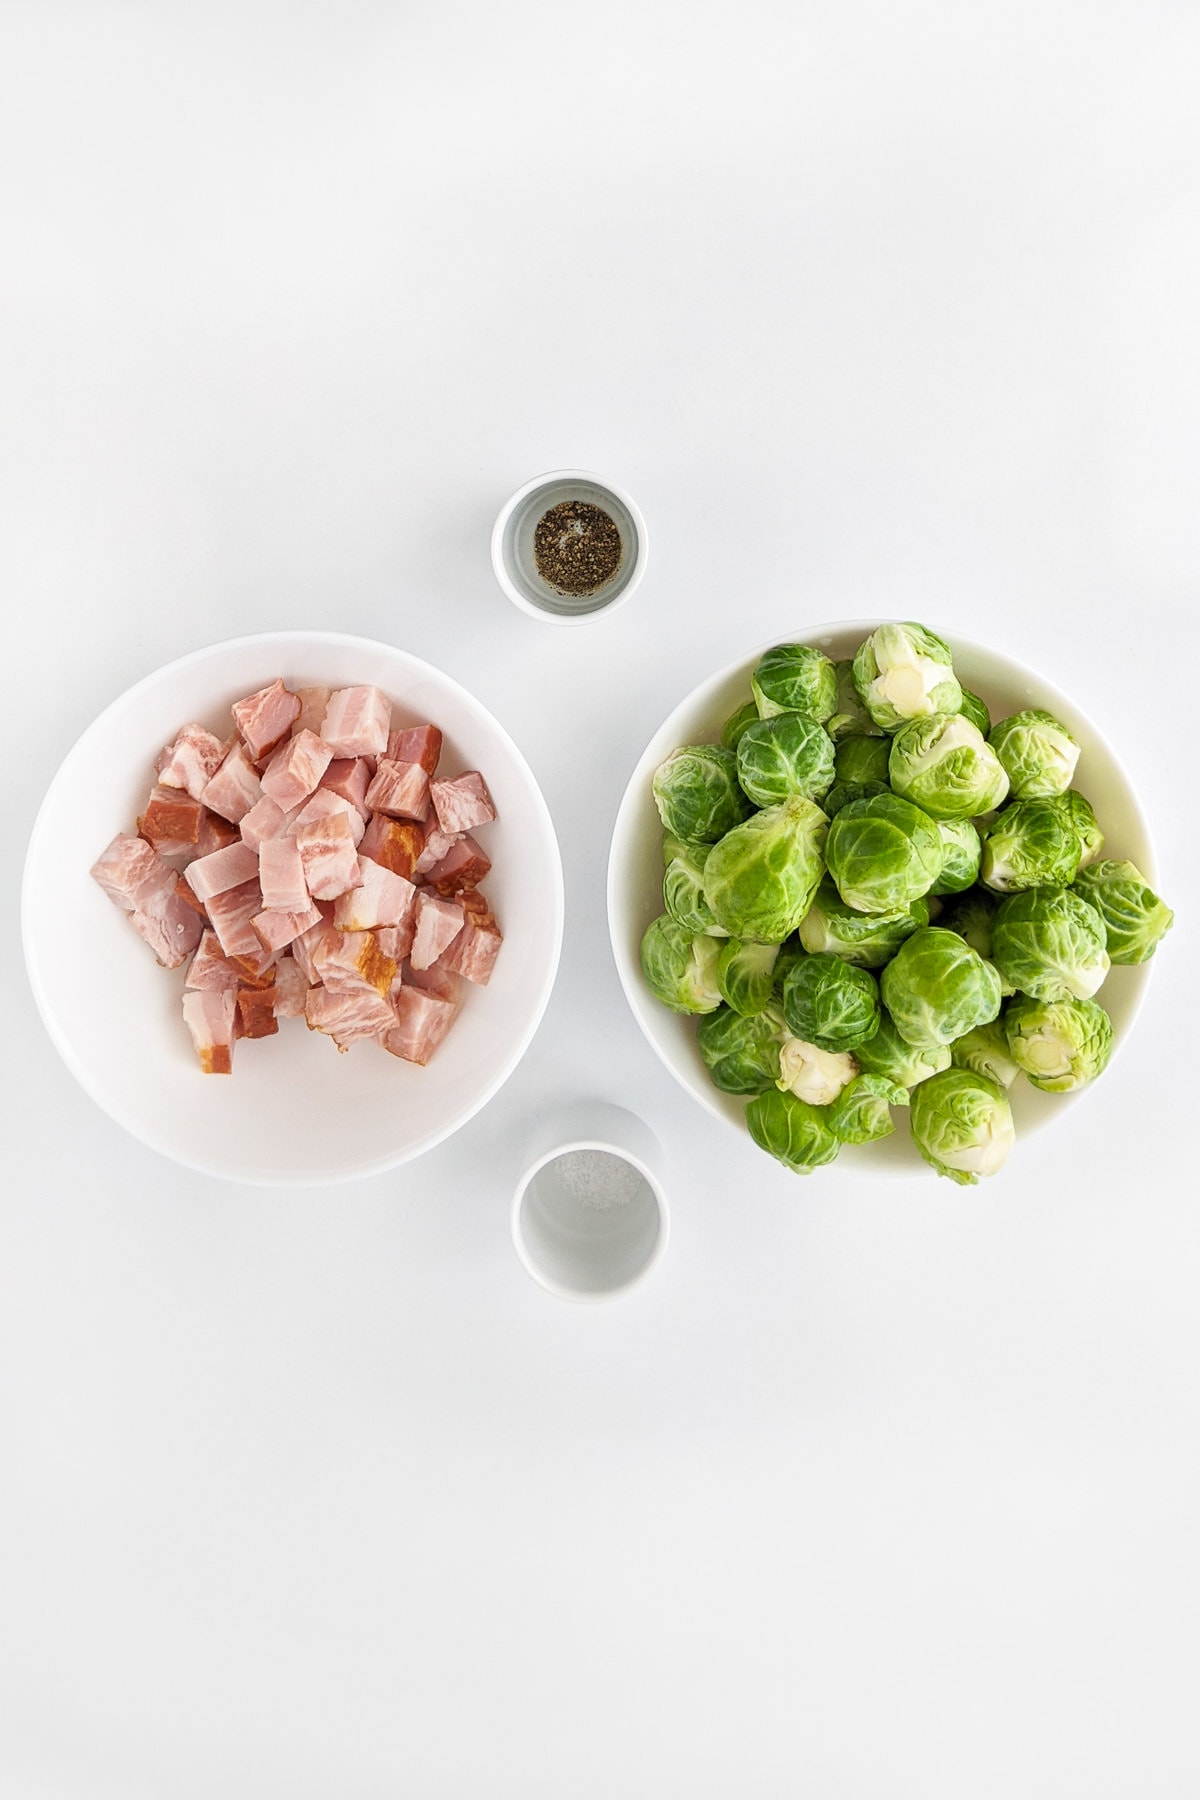 White plates with diced bacon, brussels sprouts, salt and pepper.